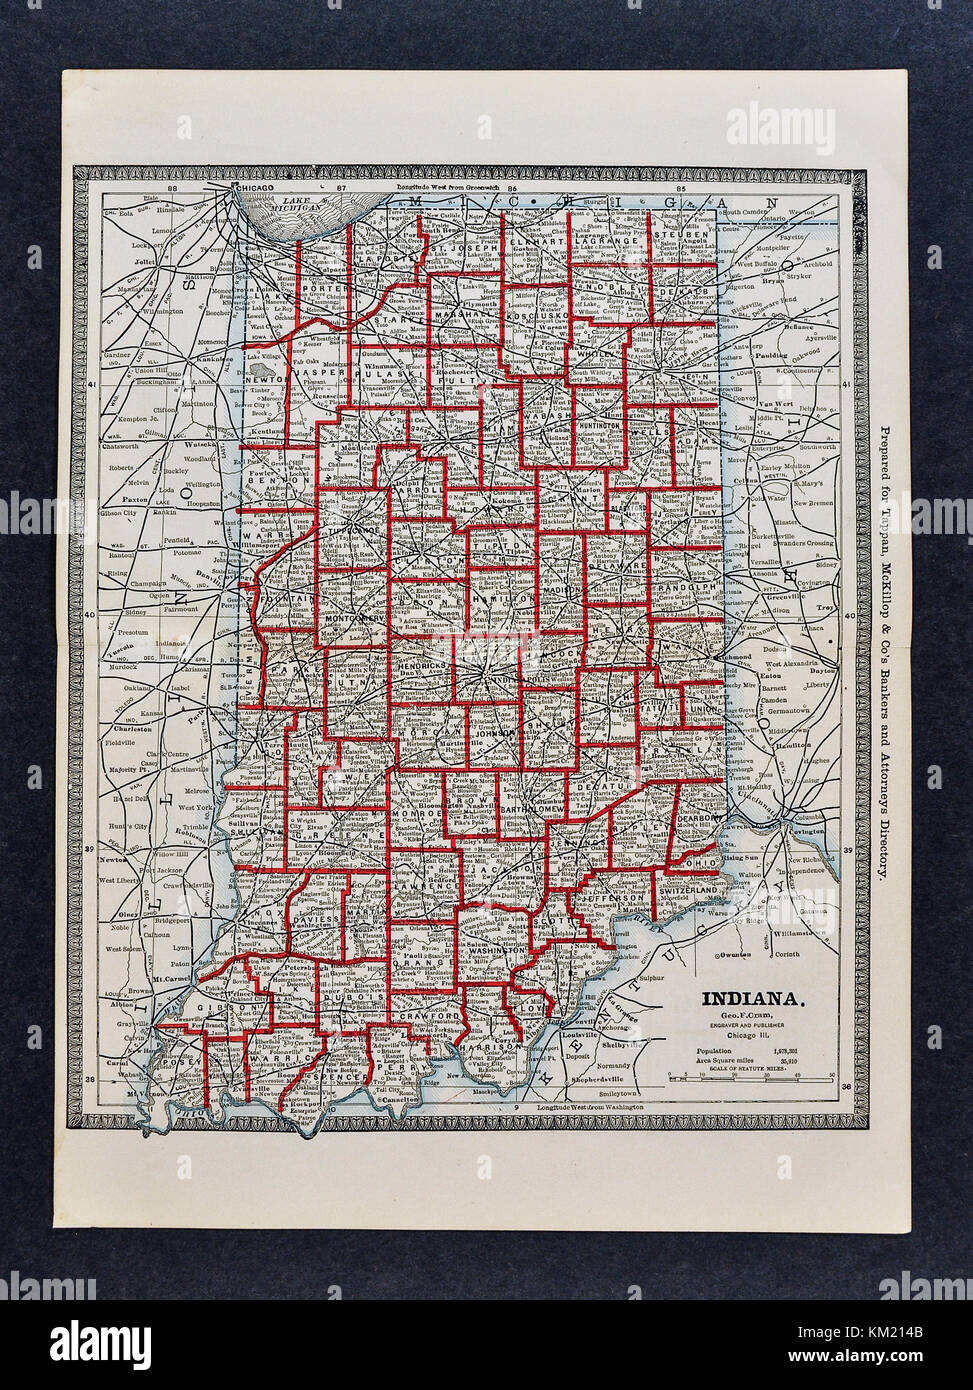 George Cram Antique Map from 1866 Atlas for Attorneys and Bankers: United States - Indiana - Indianapolis Fort Wayne South Bend Stock Photo